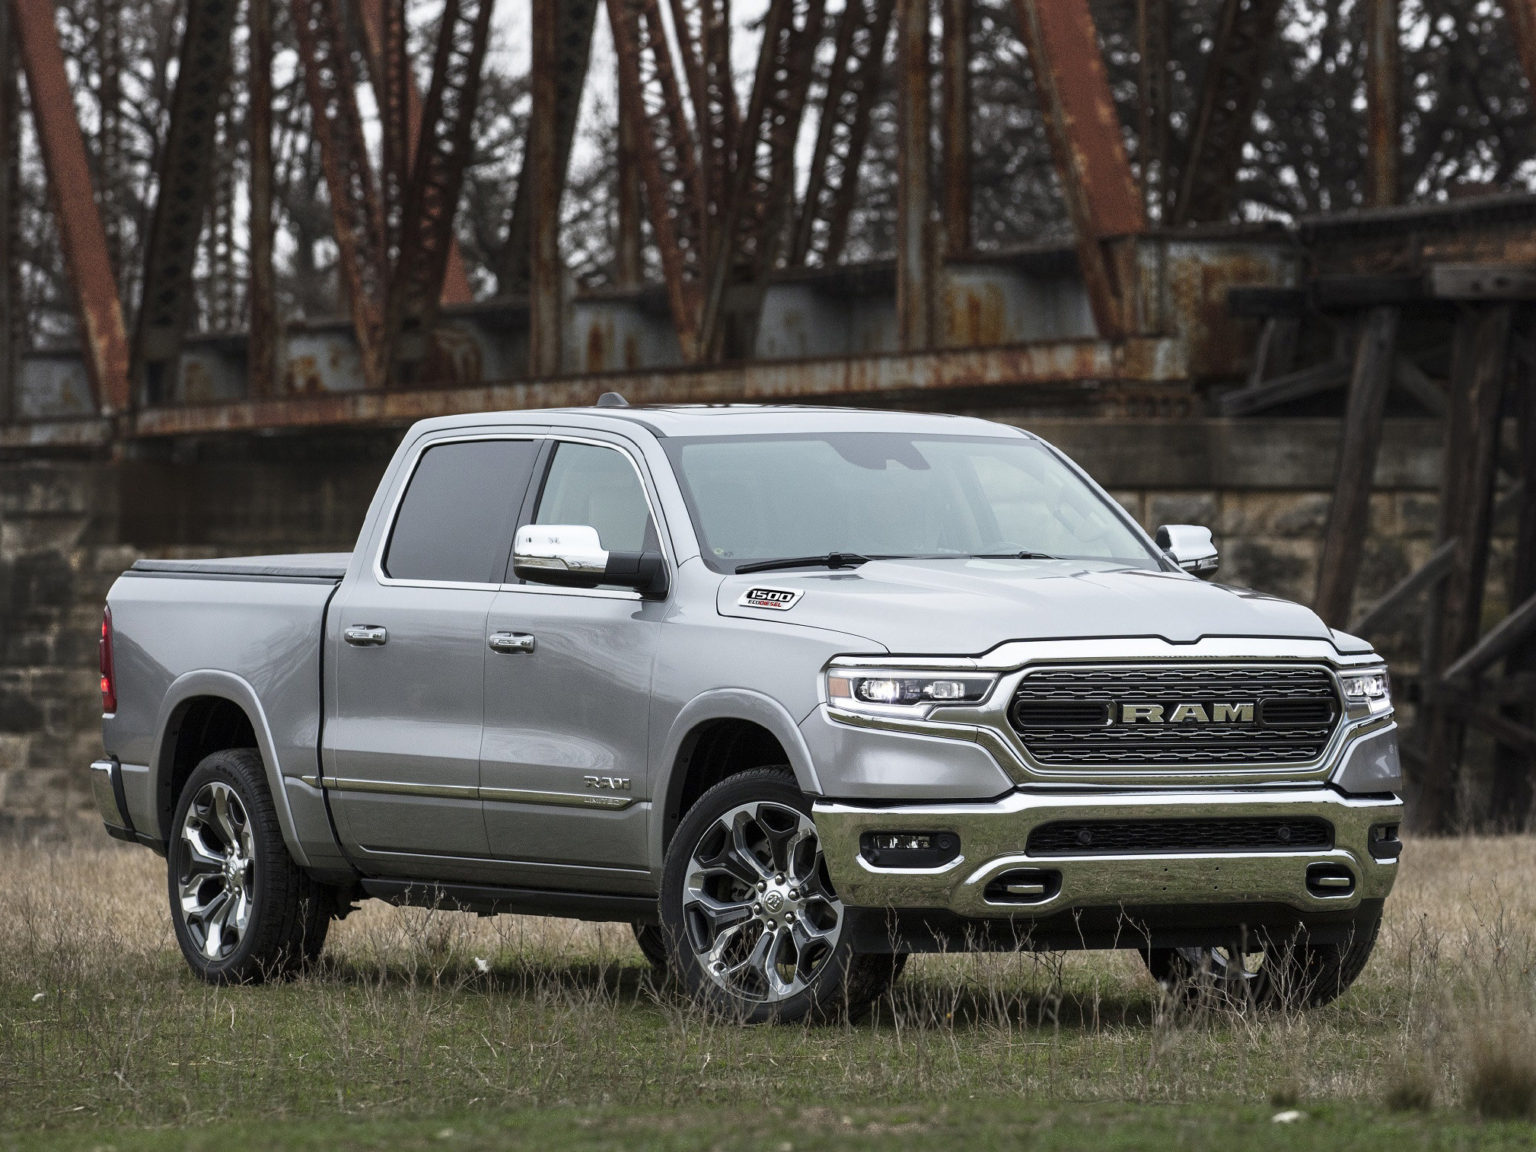 The 2020 Ram 1500 is formidable but with the EcoDiesel power plant, it begins to stumble.